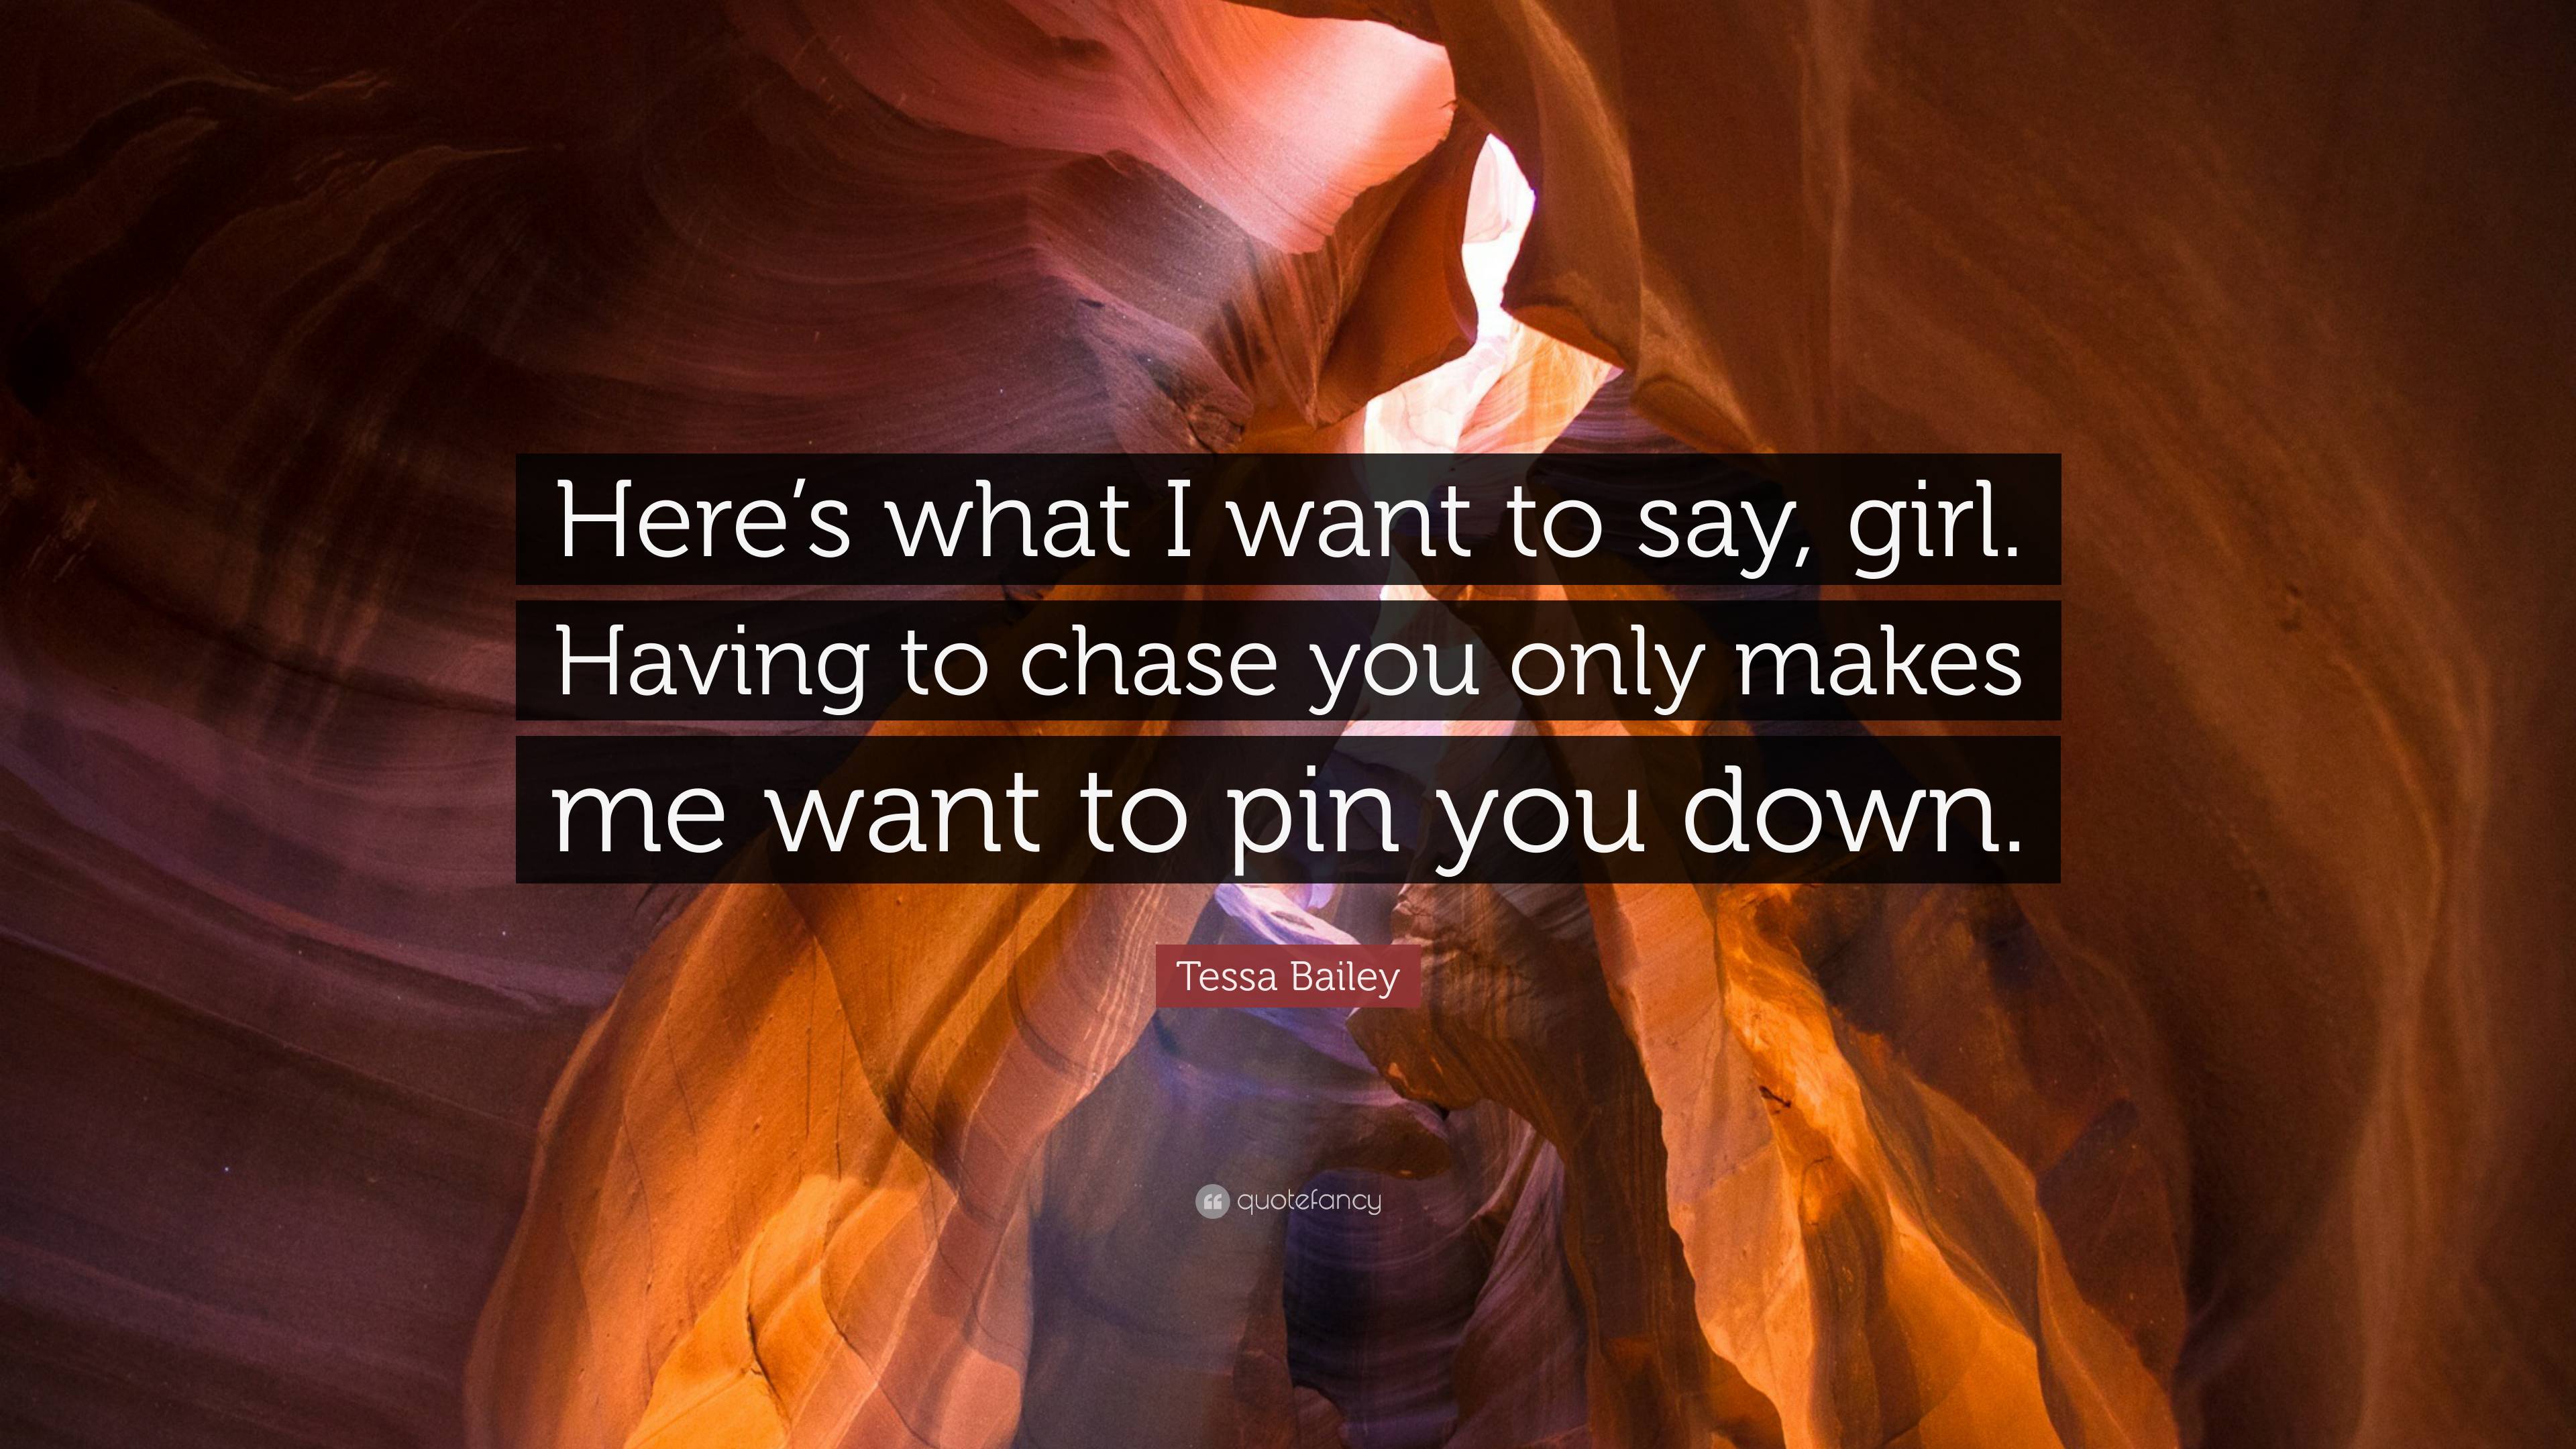 https://quotefancy.com/media/wallpaper/3840x2160/7430486-Tessa-Bailey-Quote-Here-s-what-I-want-to-say-girl-Having-to-chase.jpg